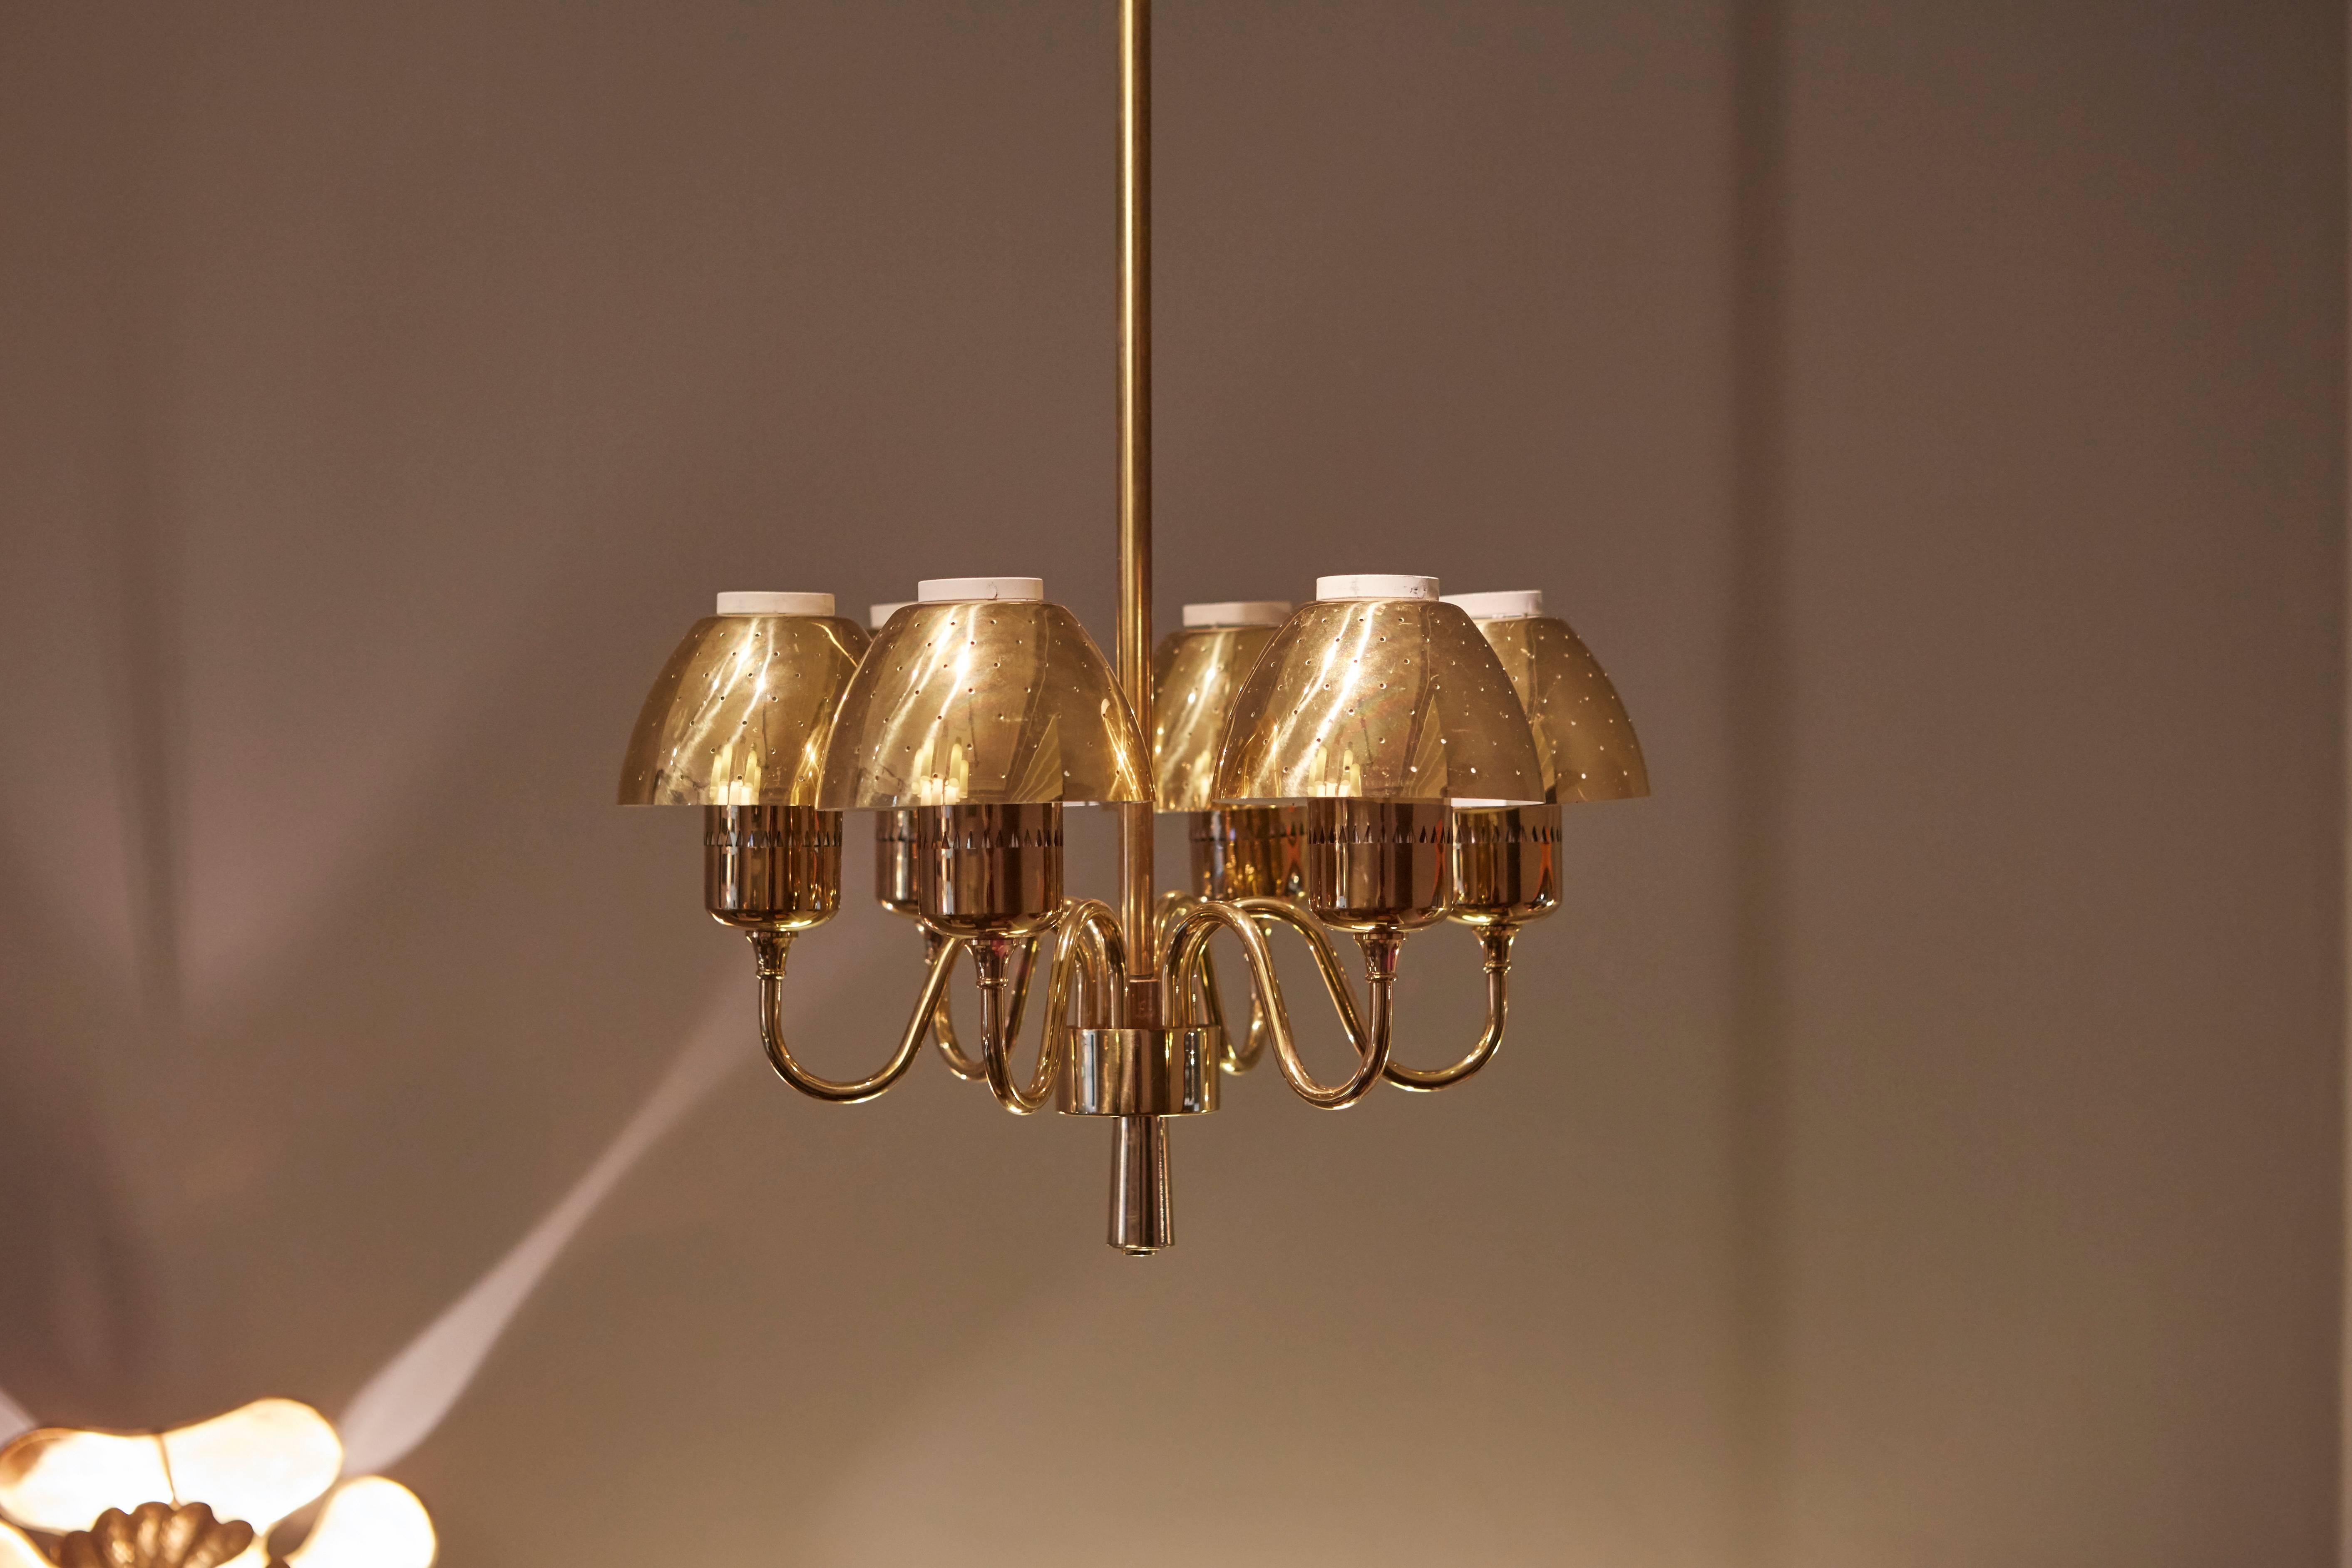 Chandelier, brass frame, six branches decorated with perforated and conical shades.
Swedish work, designed and made by Hans-Agne Jakobsson (1919-2009).